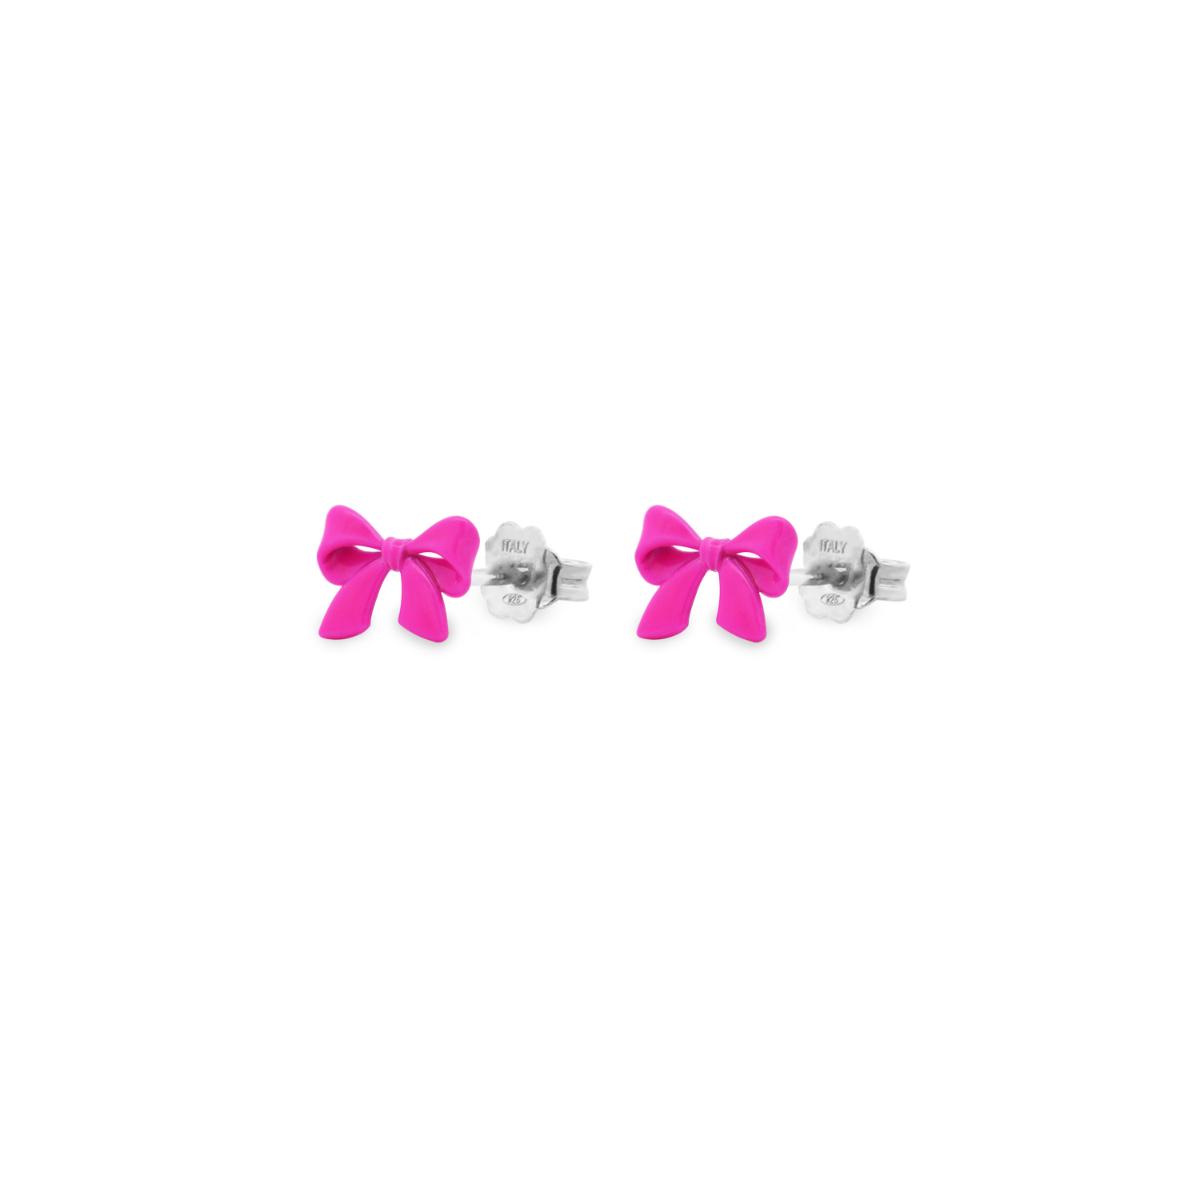 Pair of earrings chic bow neon pink - CANDY BOW